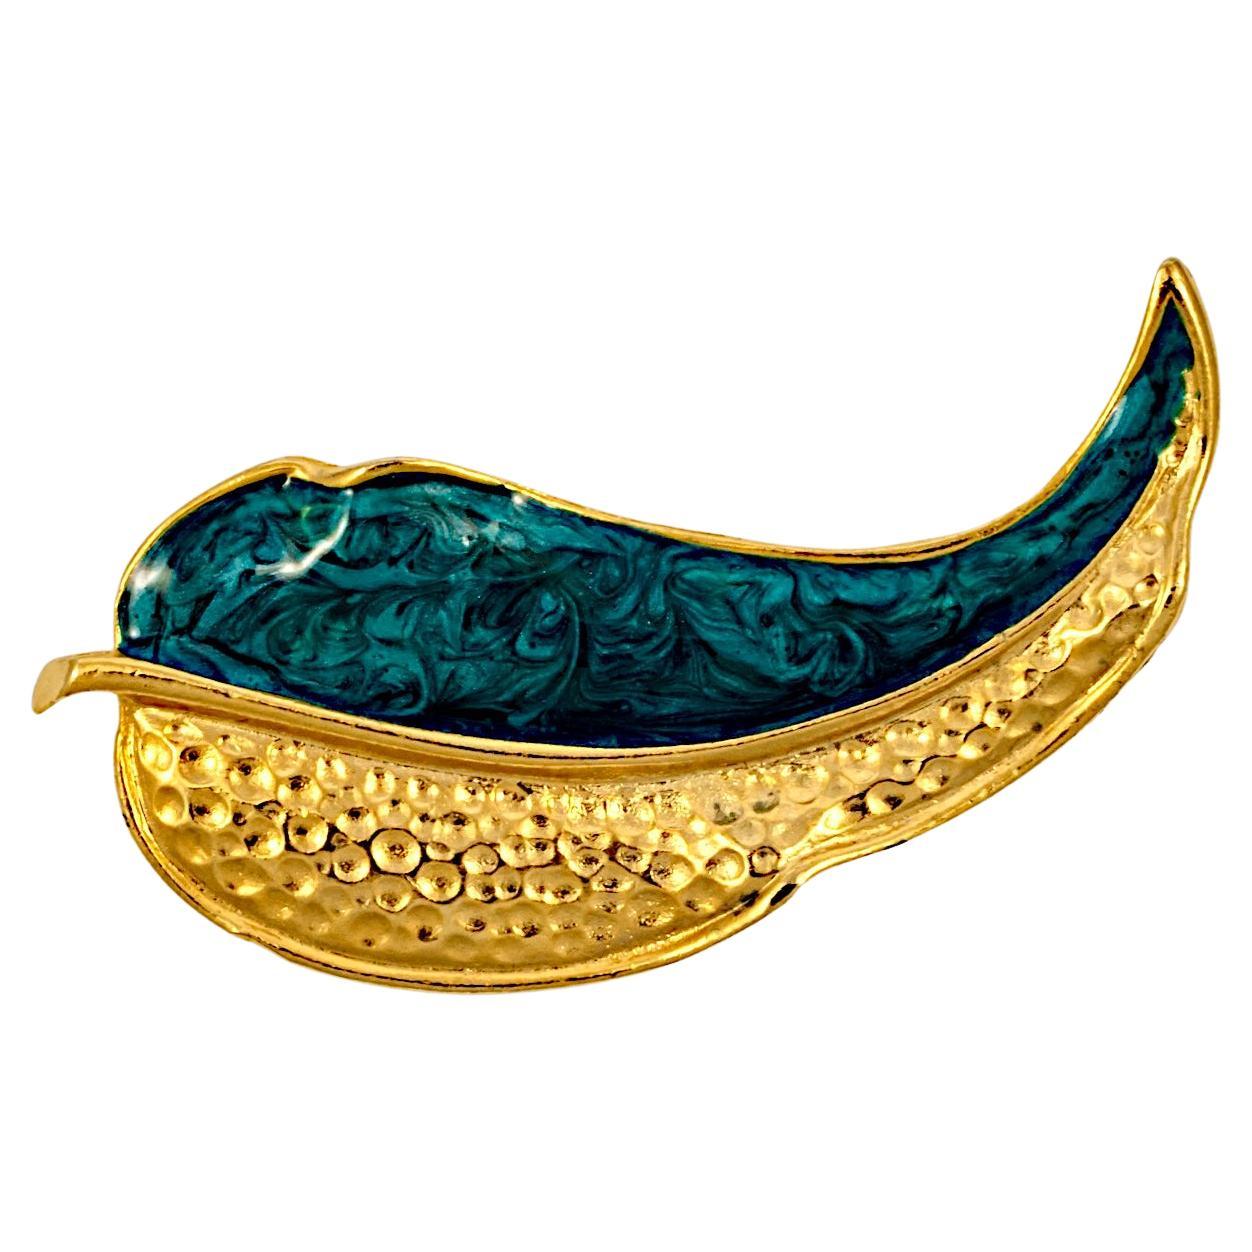 Gold Plated and Teal Enamel Leaf Brooch circa 1980s For Sale